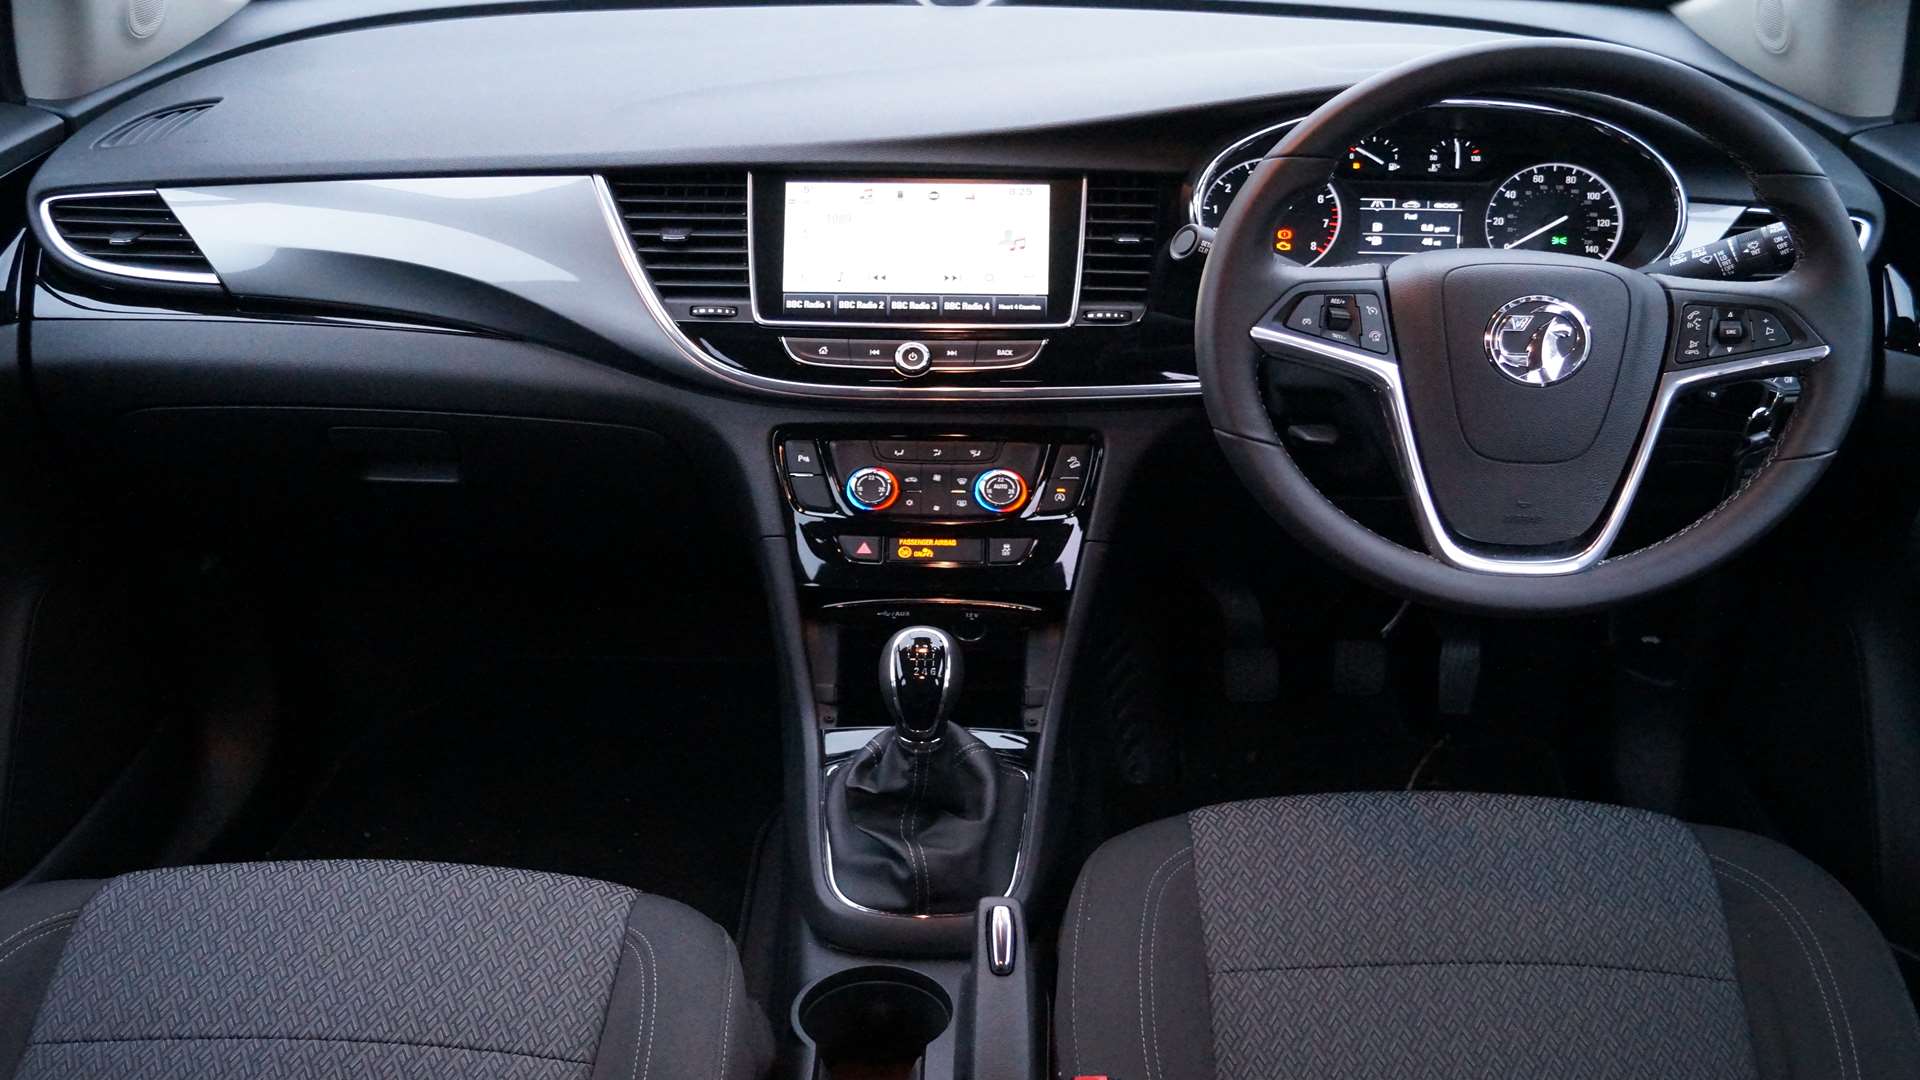 There’s an abundance of tactile, soft-touch materials that help give the Mokka X a premium feel